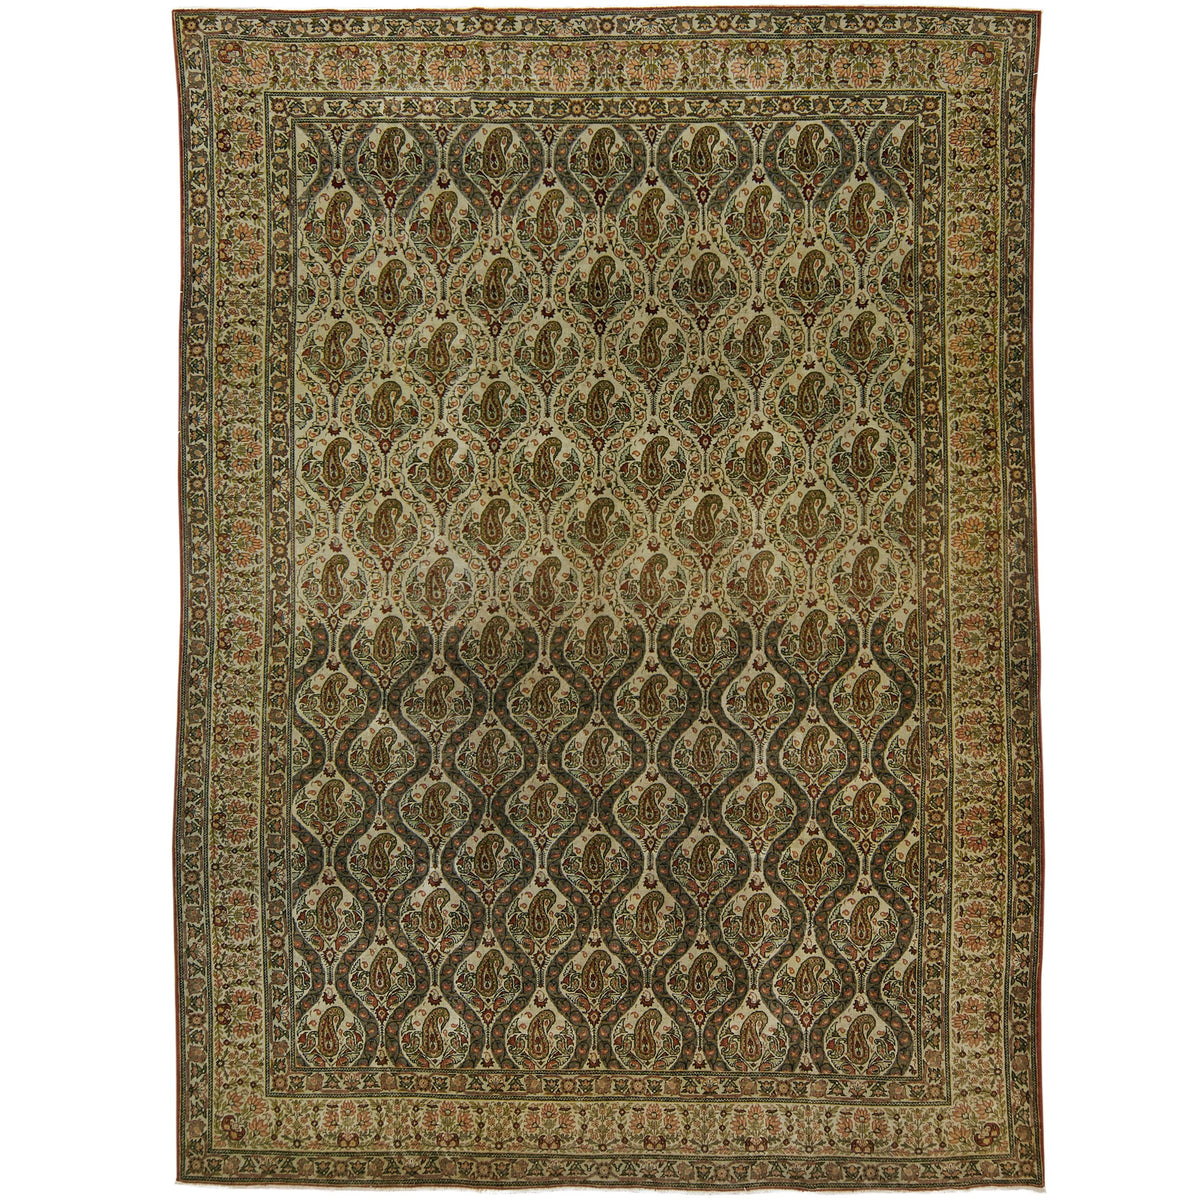 Shayna - A Tapestry of Tradition | Kuden Rugs